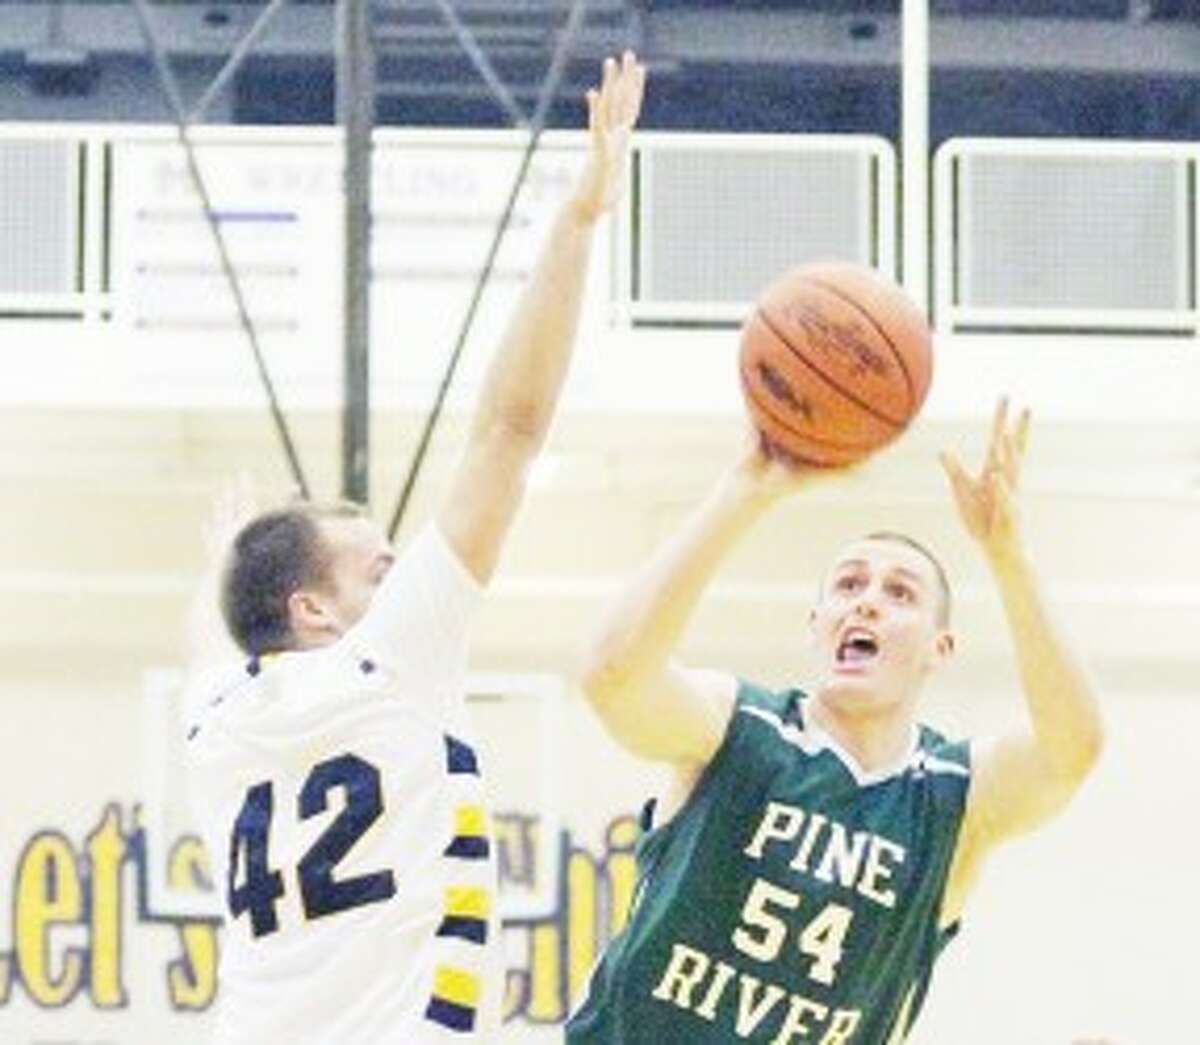 working for the win: Pine River’s Lincoln Erickson (54) tries to get a shot off over Manistee’s Jordan MacArthur during Monday’s basketball contest. (Herald Review photo/Matt Wenzel)